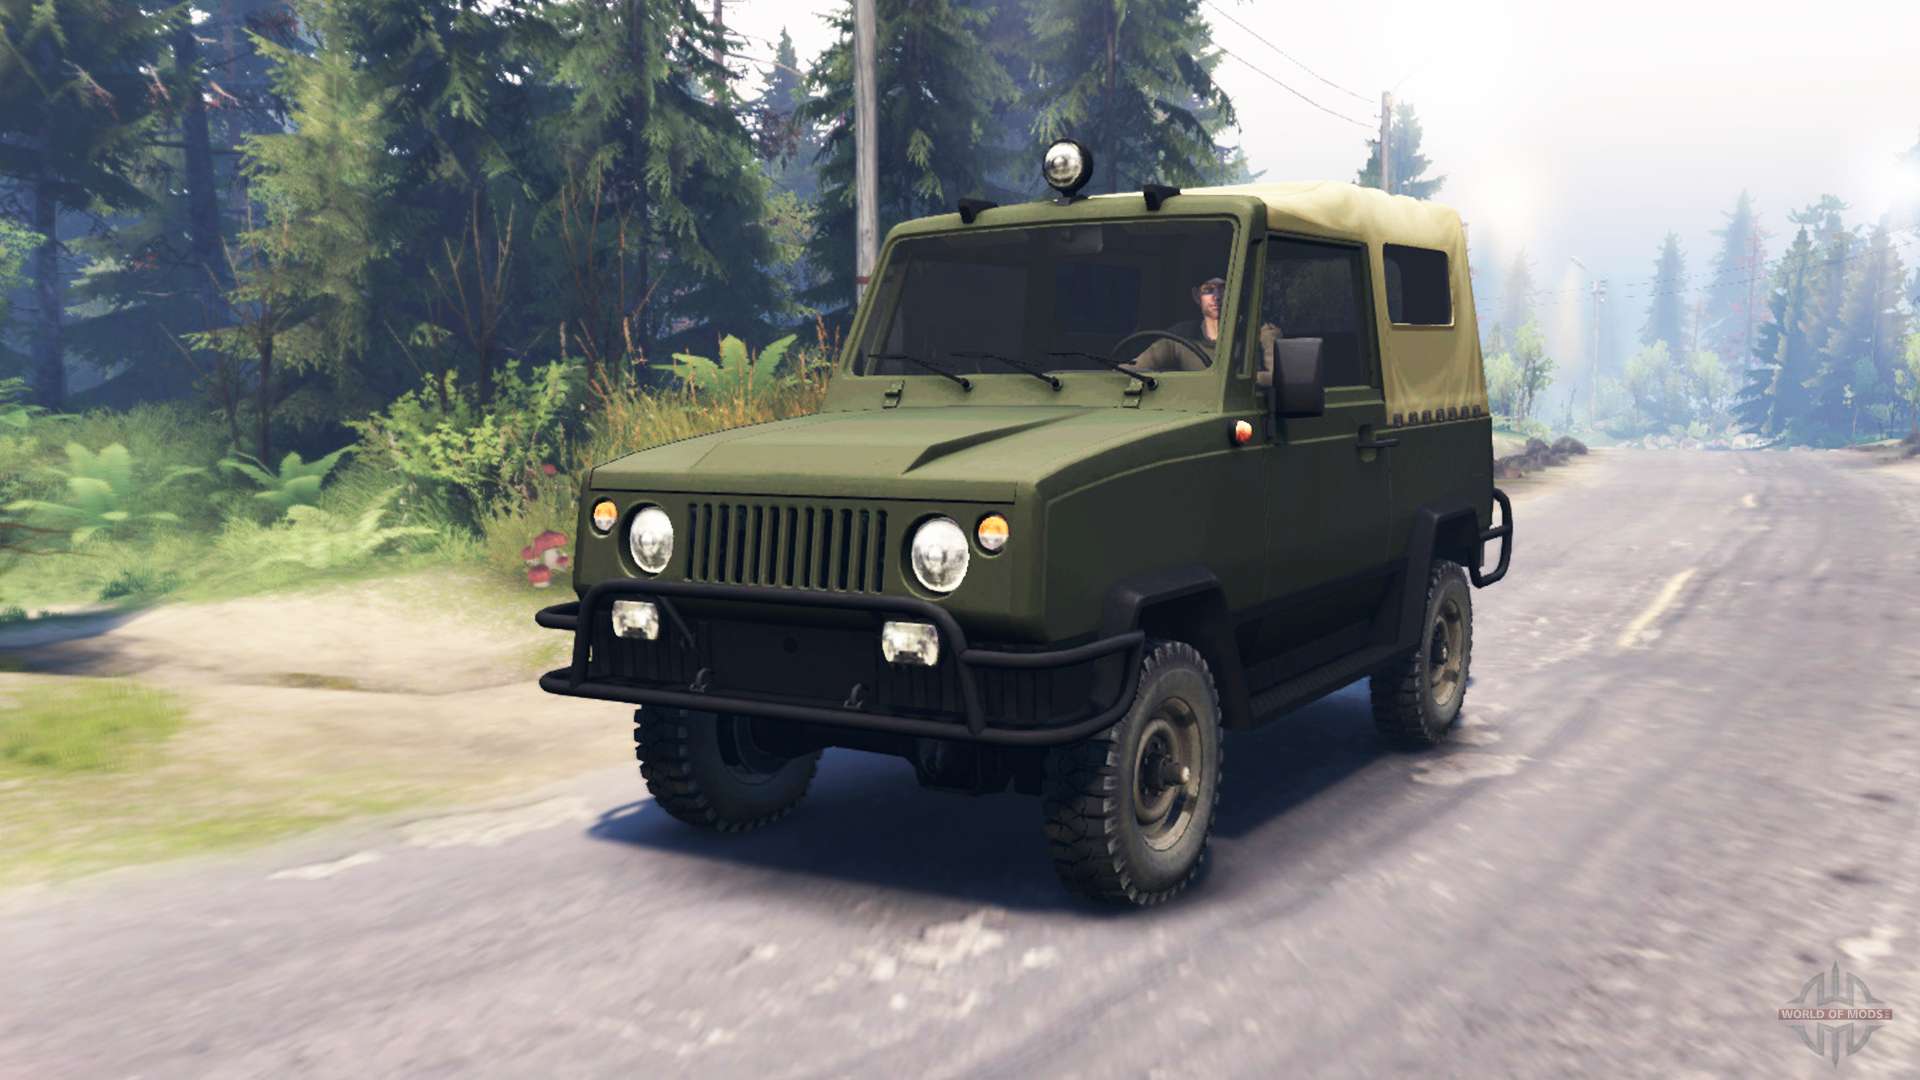 UAZ 3171 1988 for Spin Tires